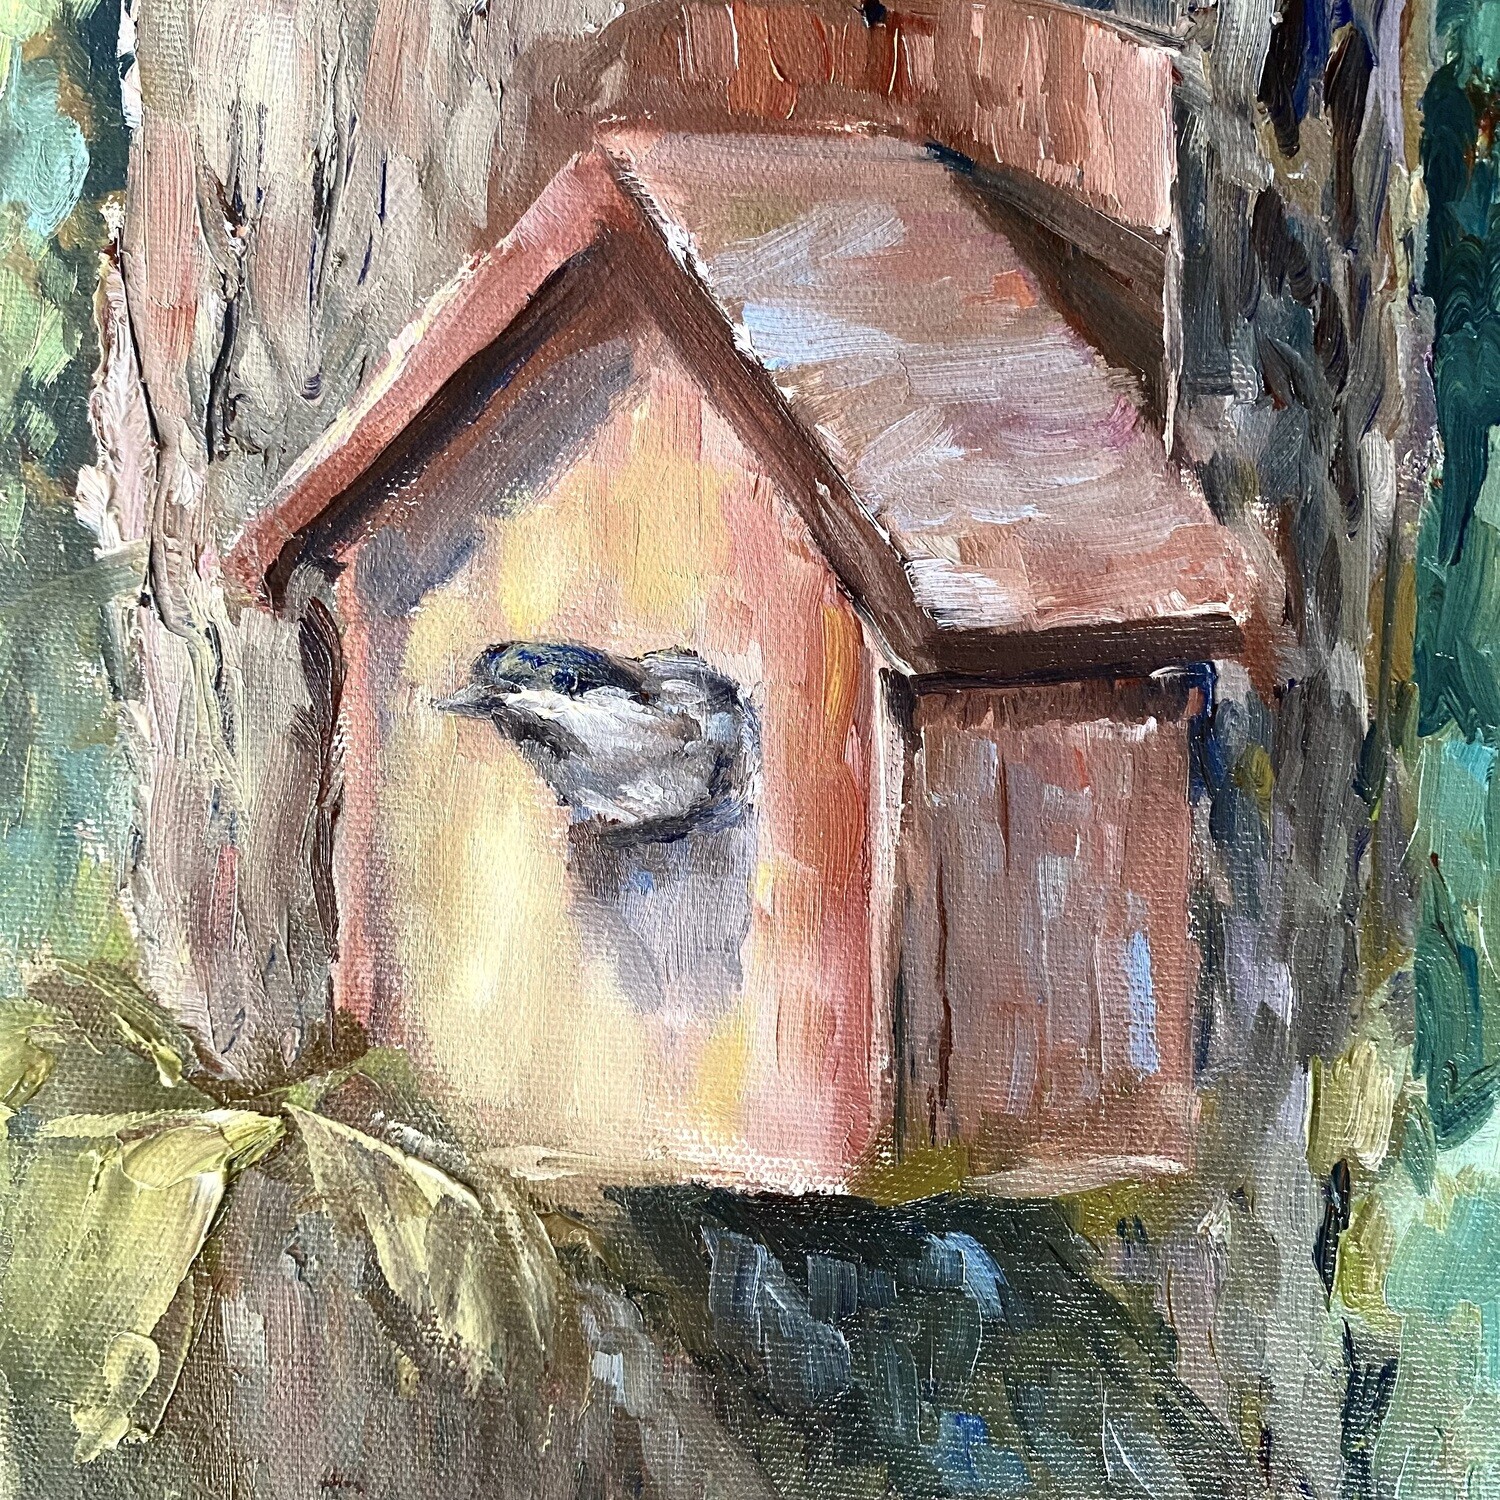 Heading Out, Chickadee in Birdhouse